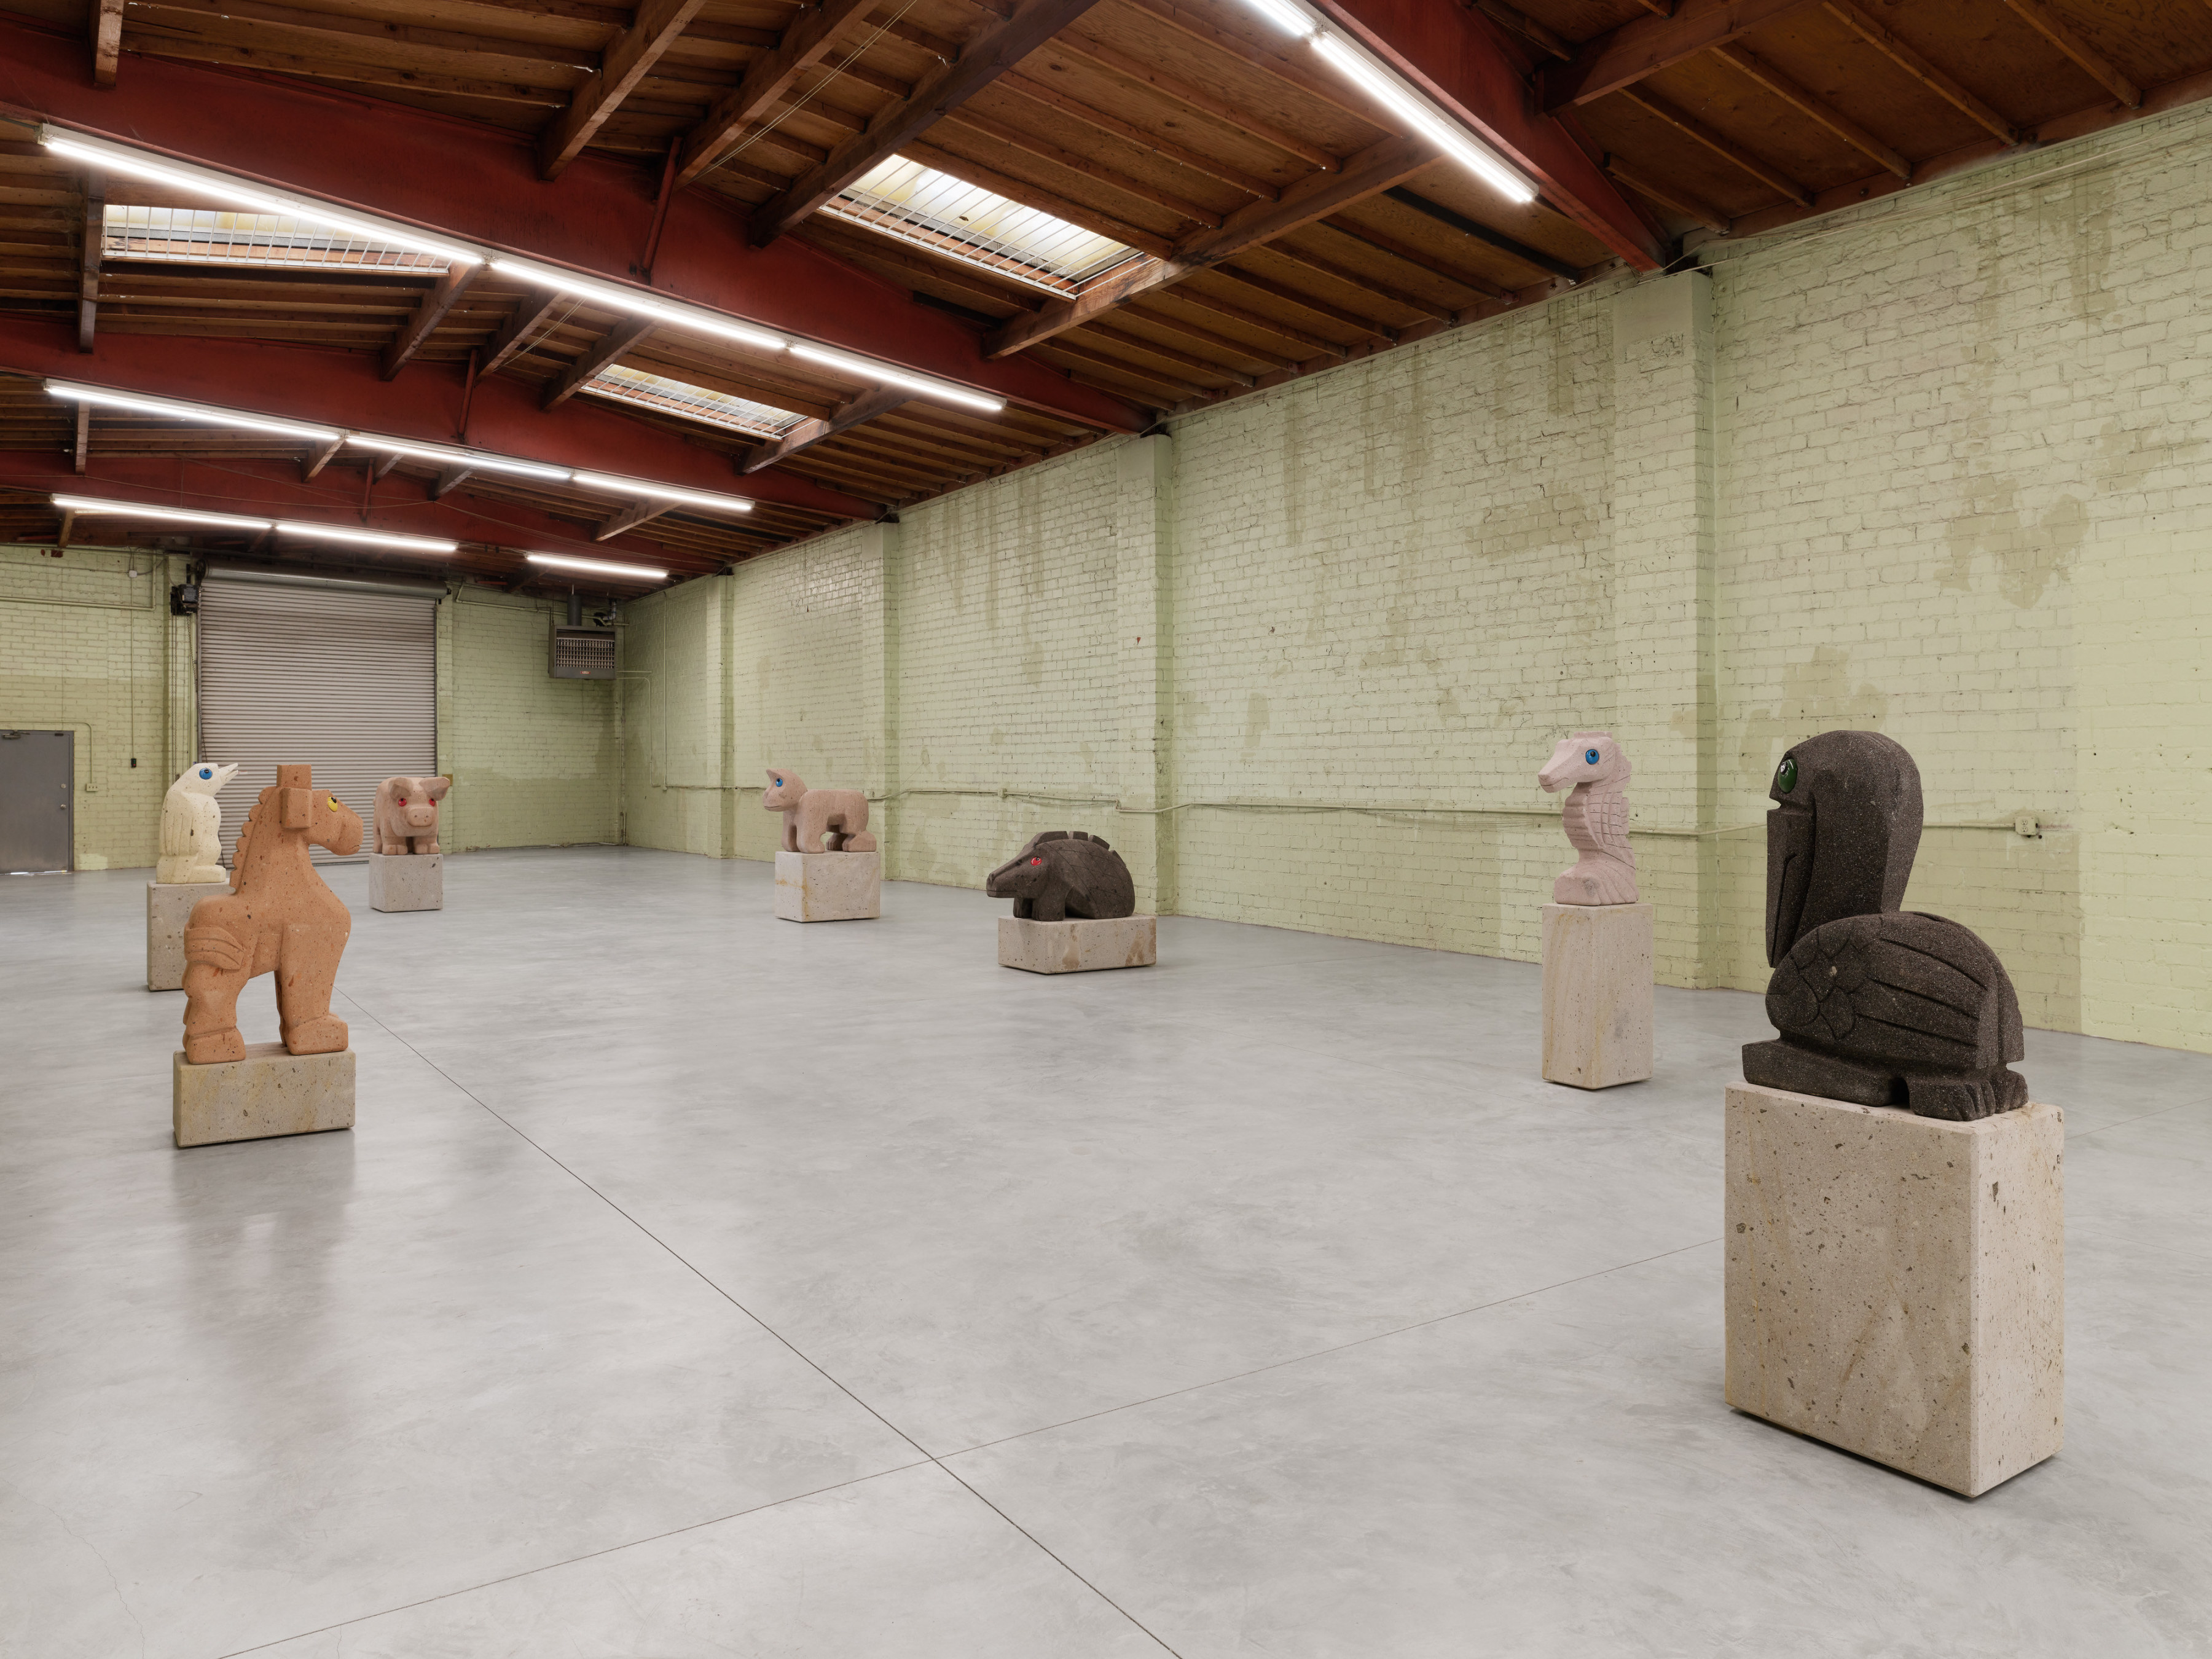 Installation view of Wanda Koop’s “Objects of Interest” at Night Gallery